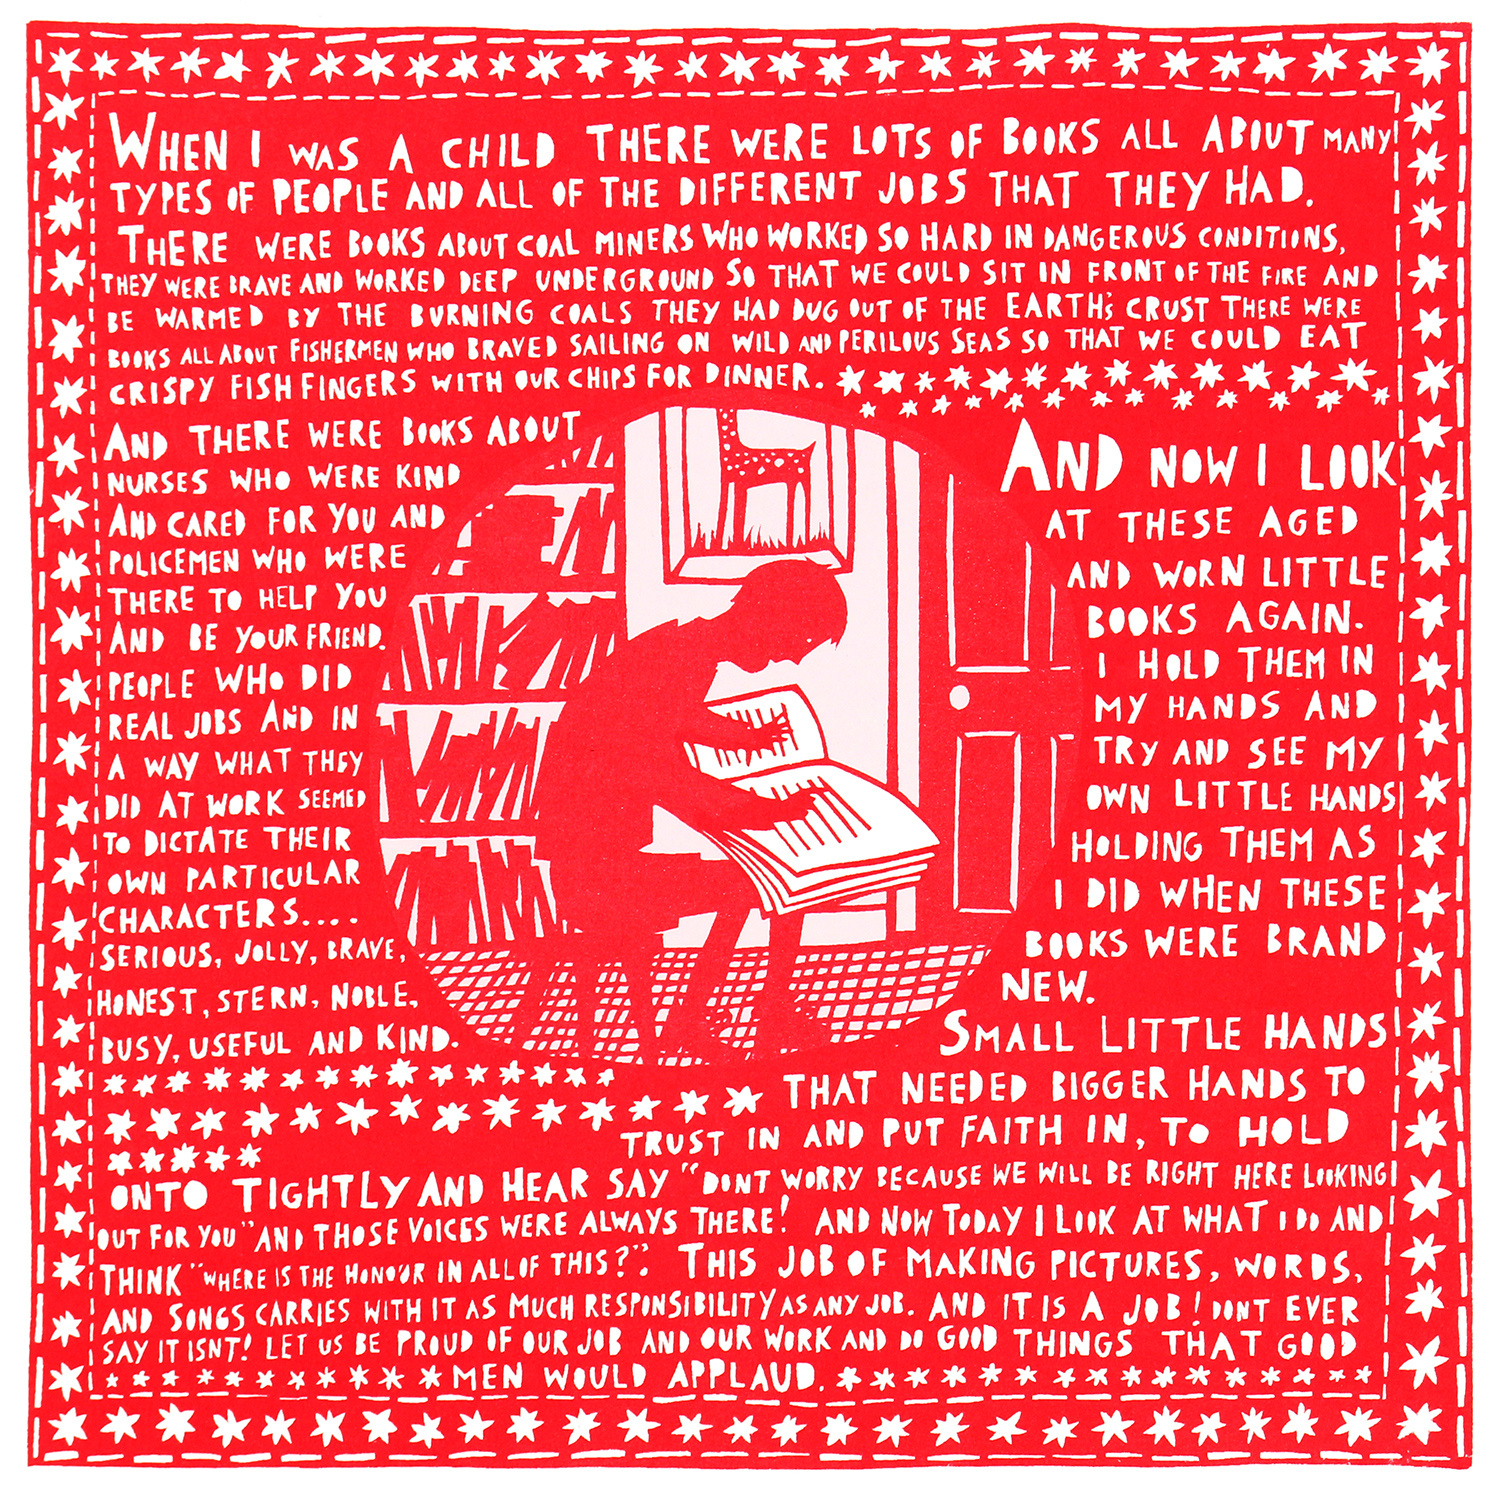 When I was a Child by Rob Ryan